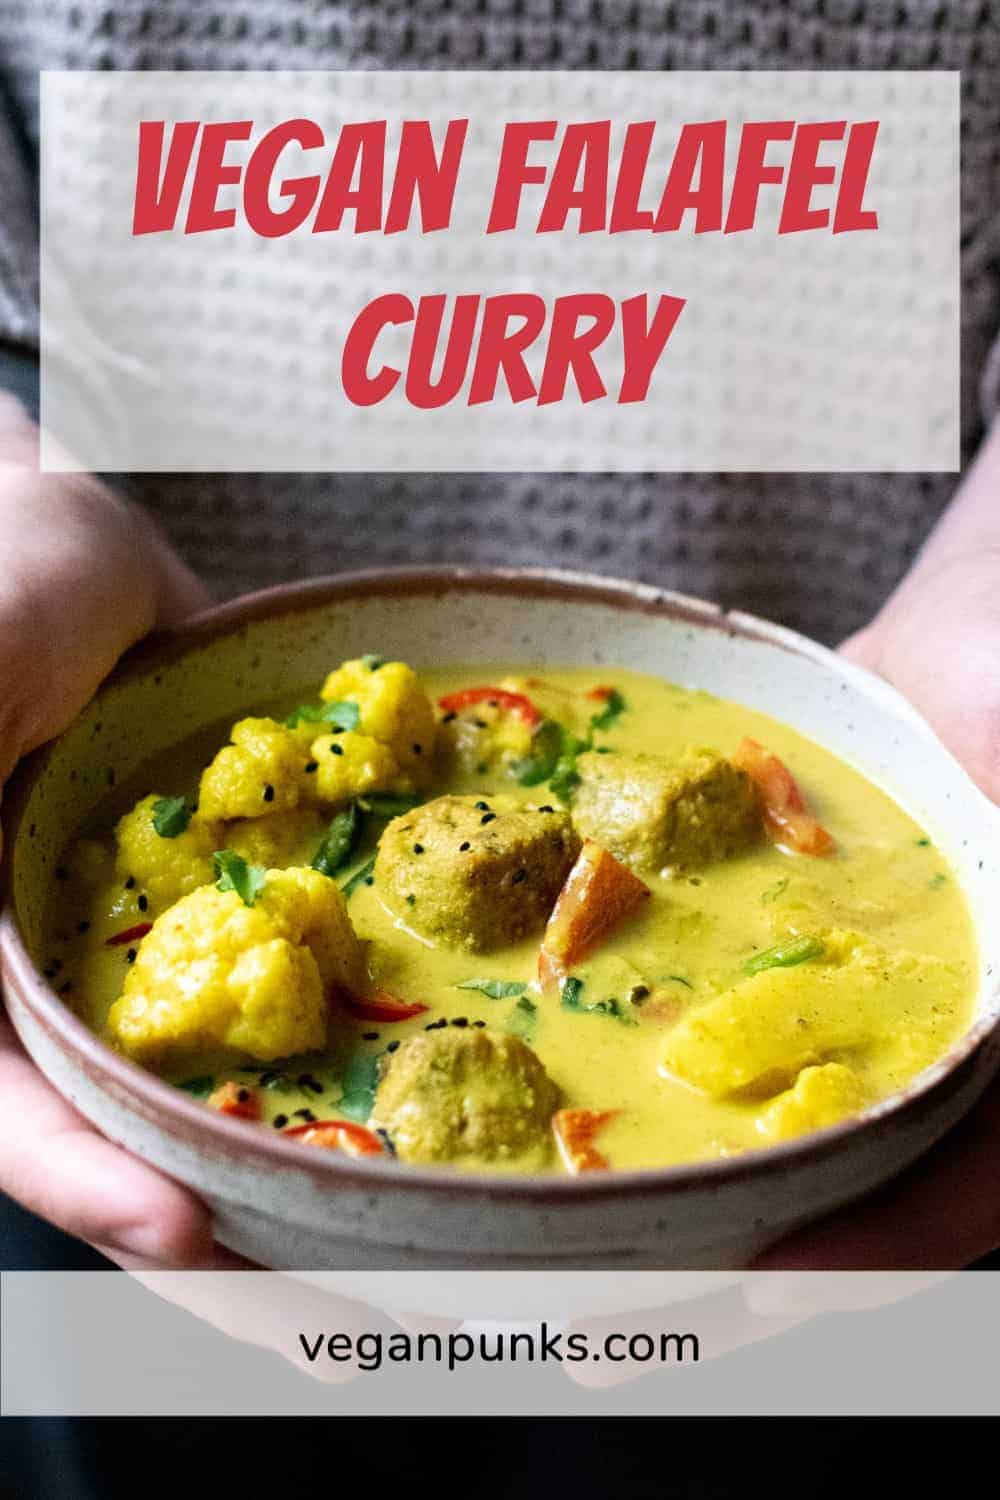 A man's hands holding a bowl of falafel curry with a Pinterest title above the image and our website name below